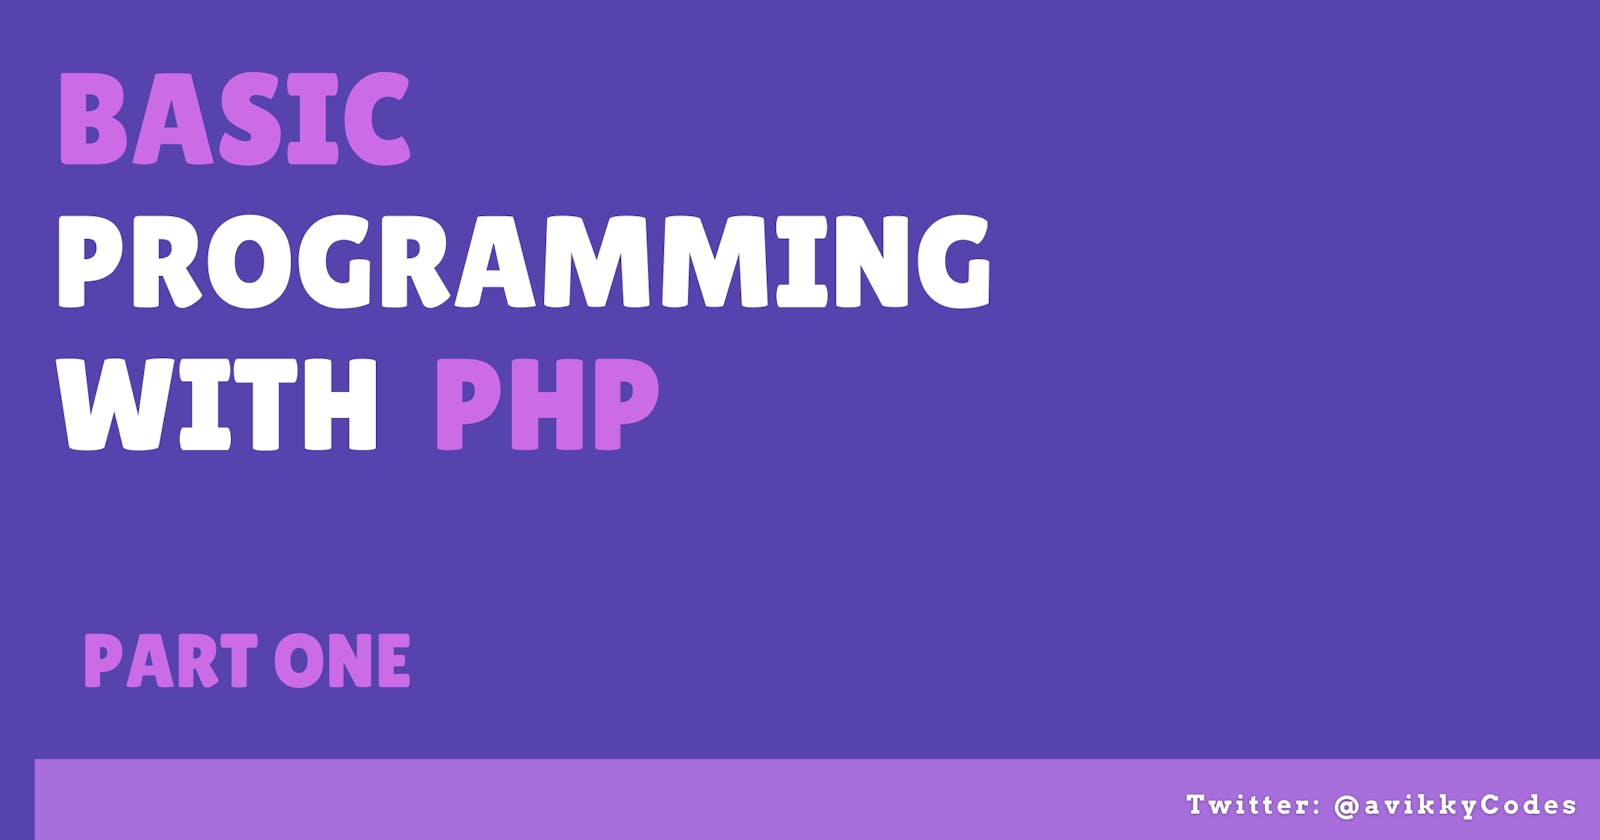 Brief Introduction to PHP